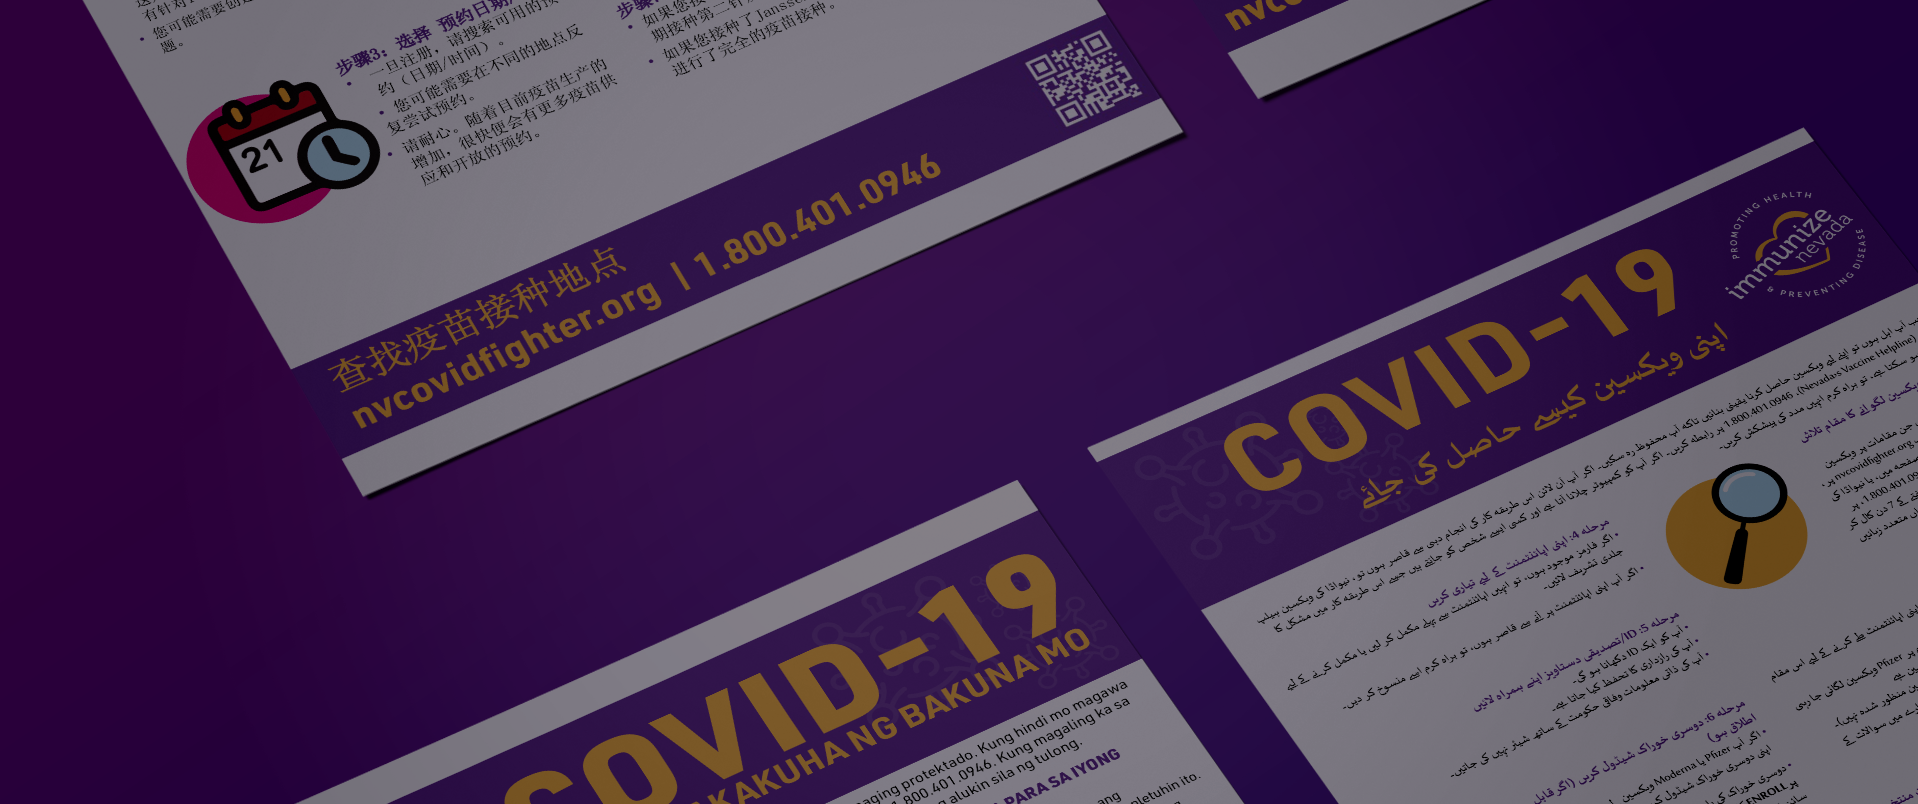 close up of COVID-19 flyers in several languages